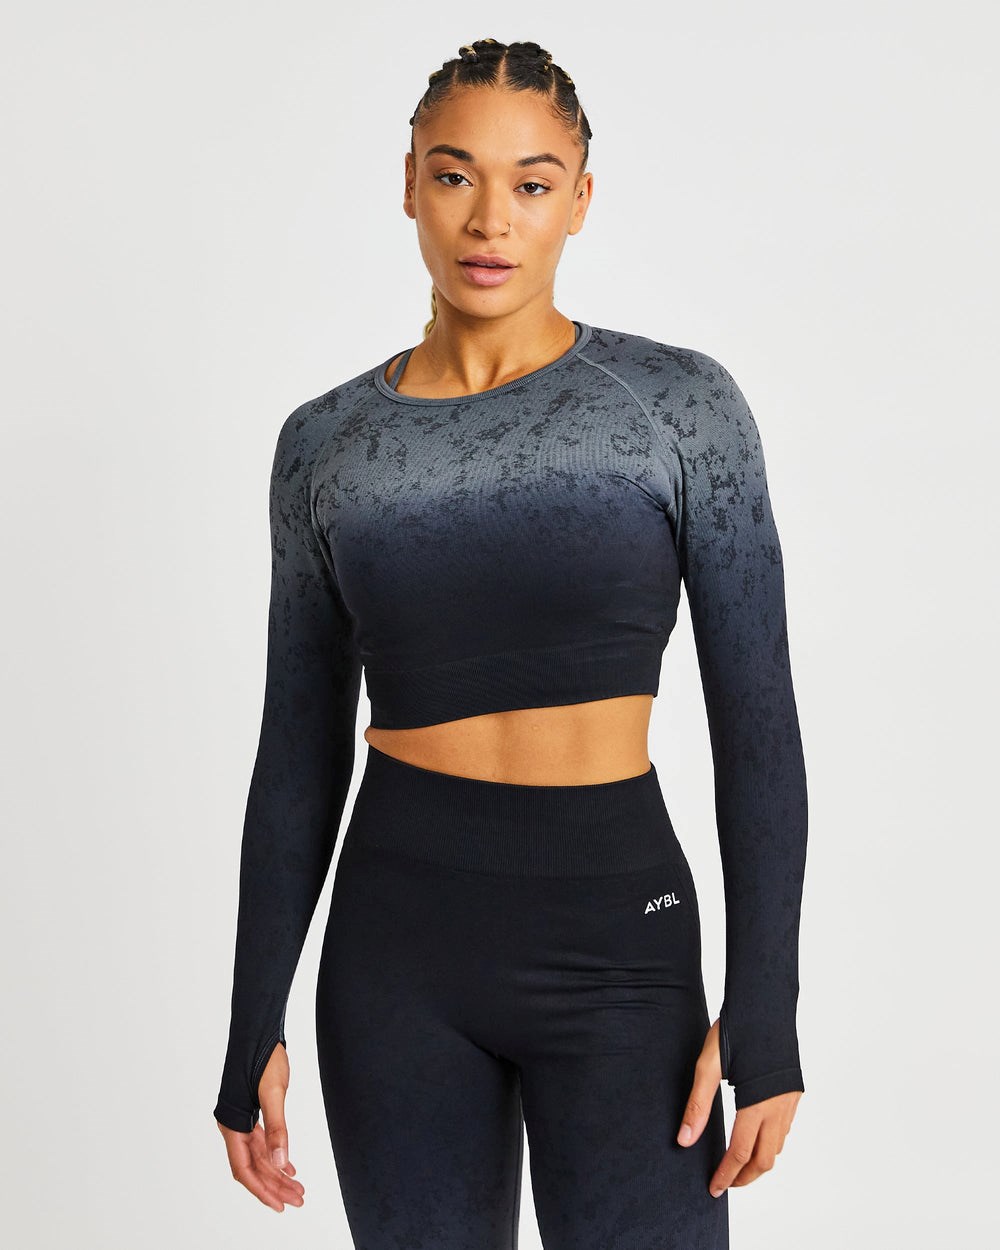 Camiseta Official - Flare Seamless Crop Mujer Negros